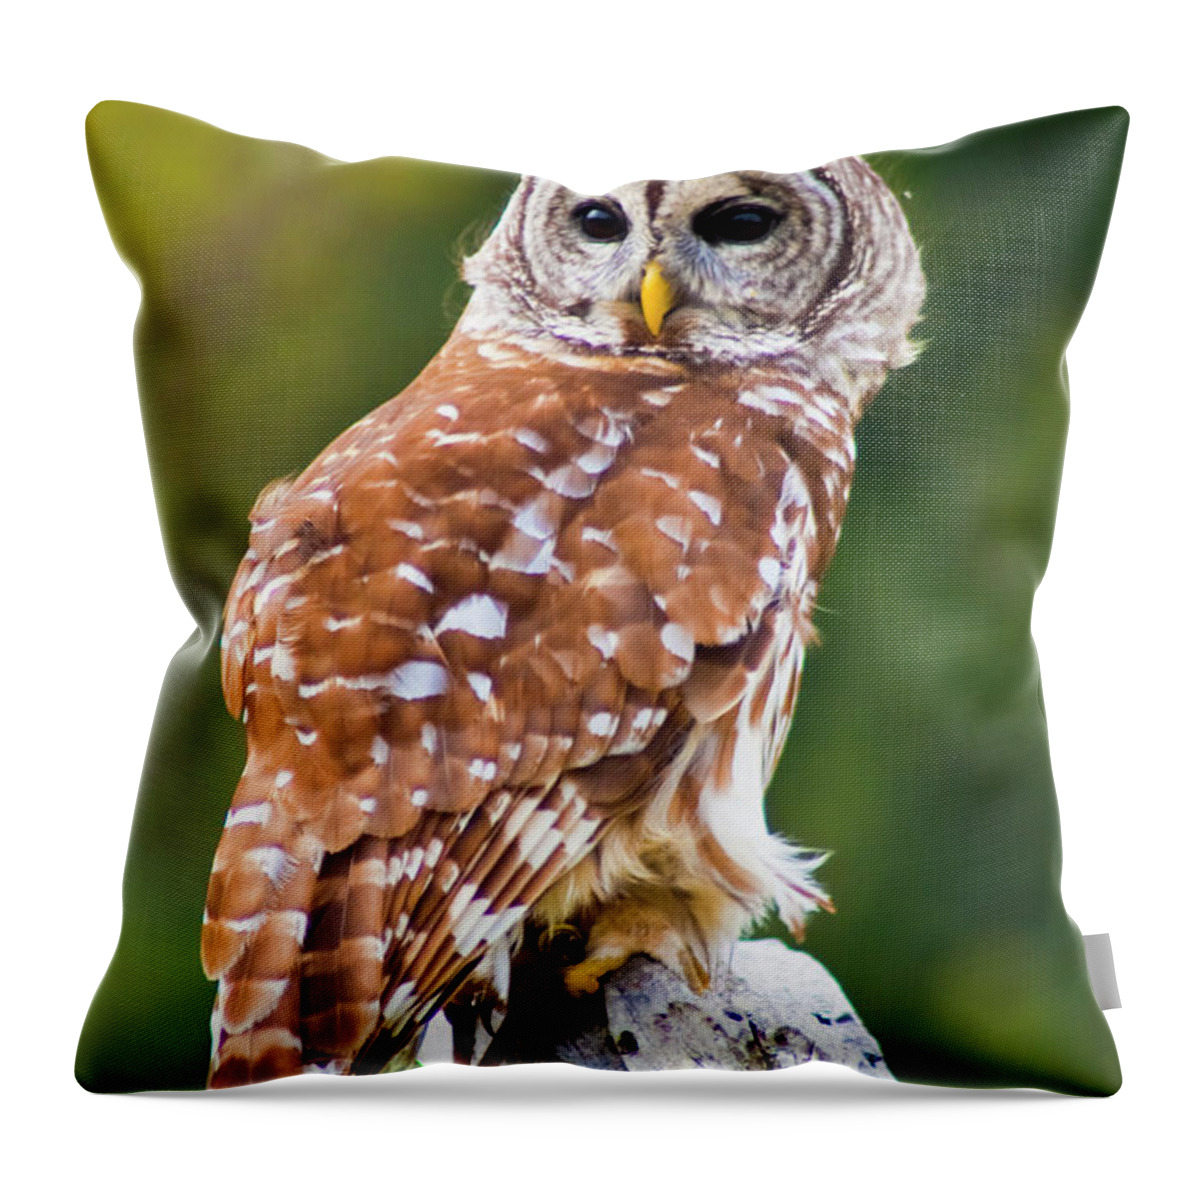 Barred Owl Throw Pillow featuring the photograph Barred Owl #1 by Bill Barber